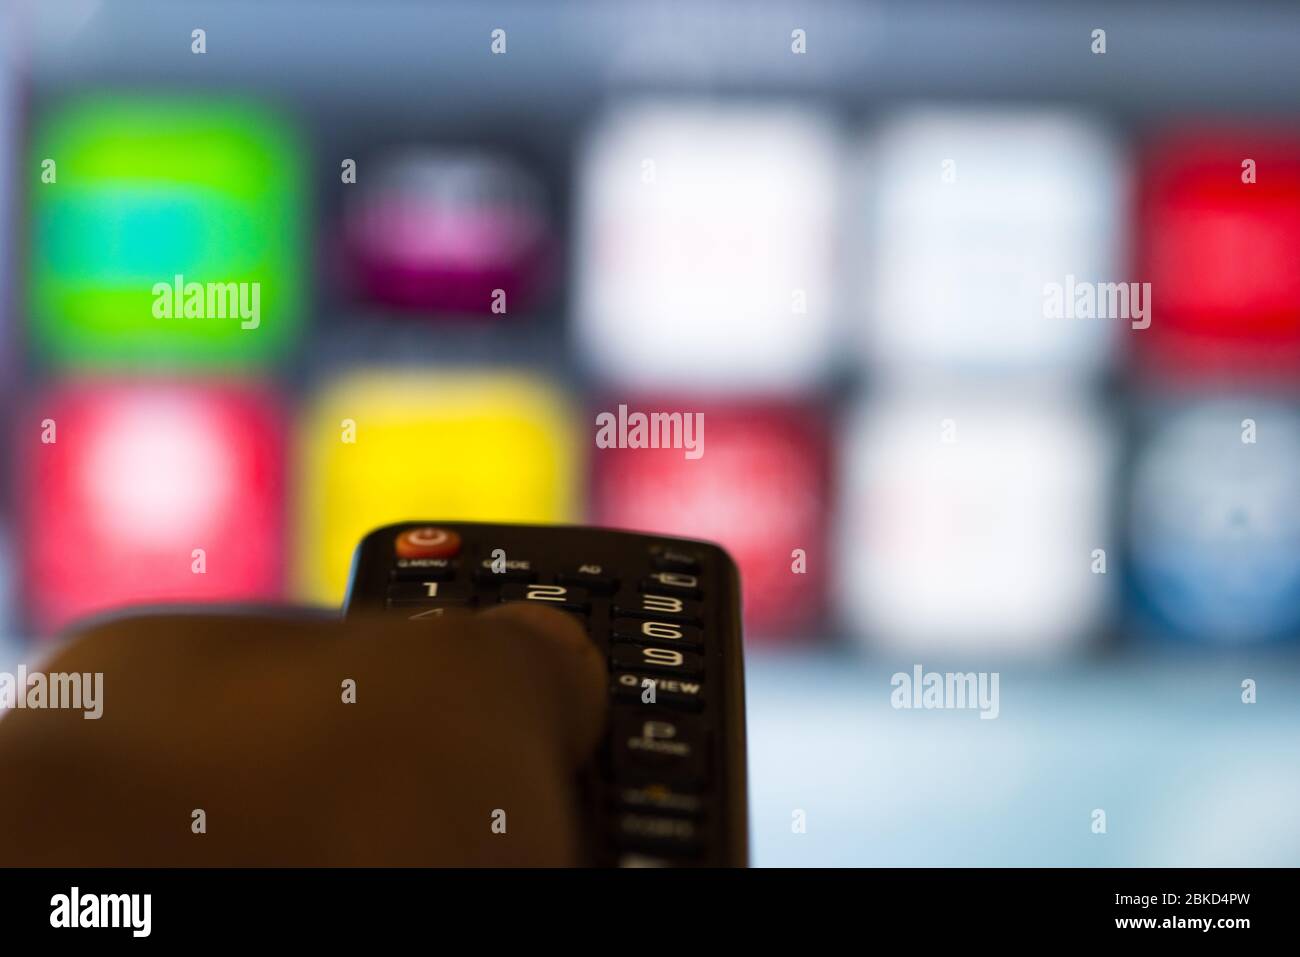 Person operating smart TV remote with television apps in background Stock Photo